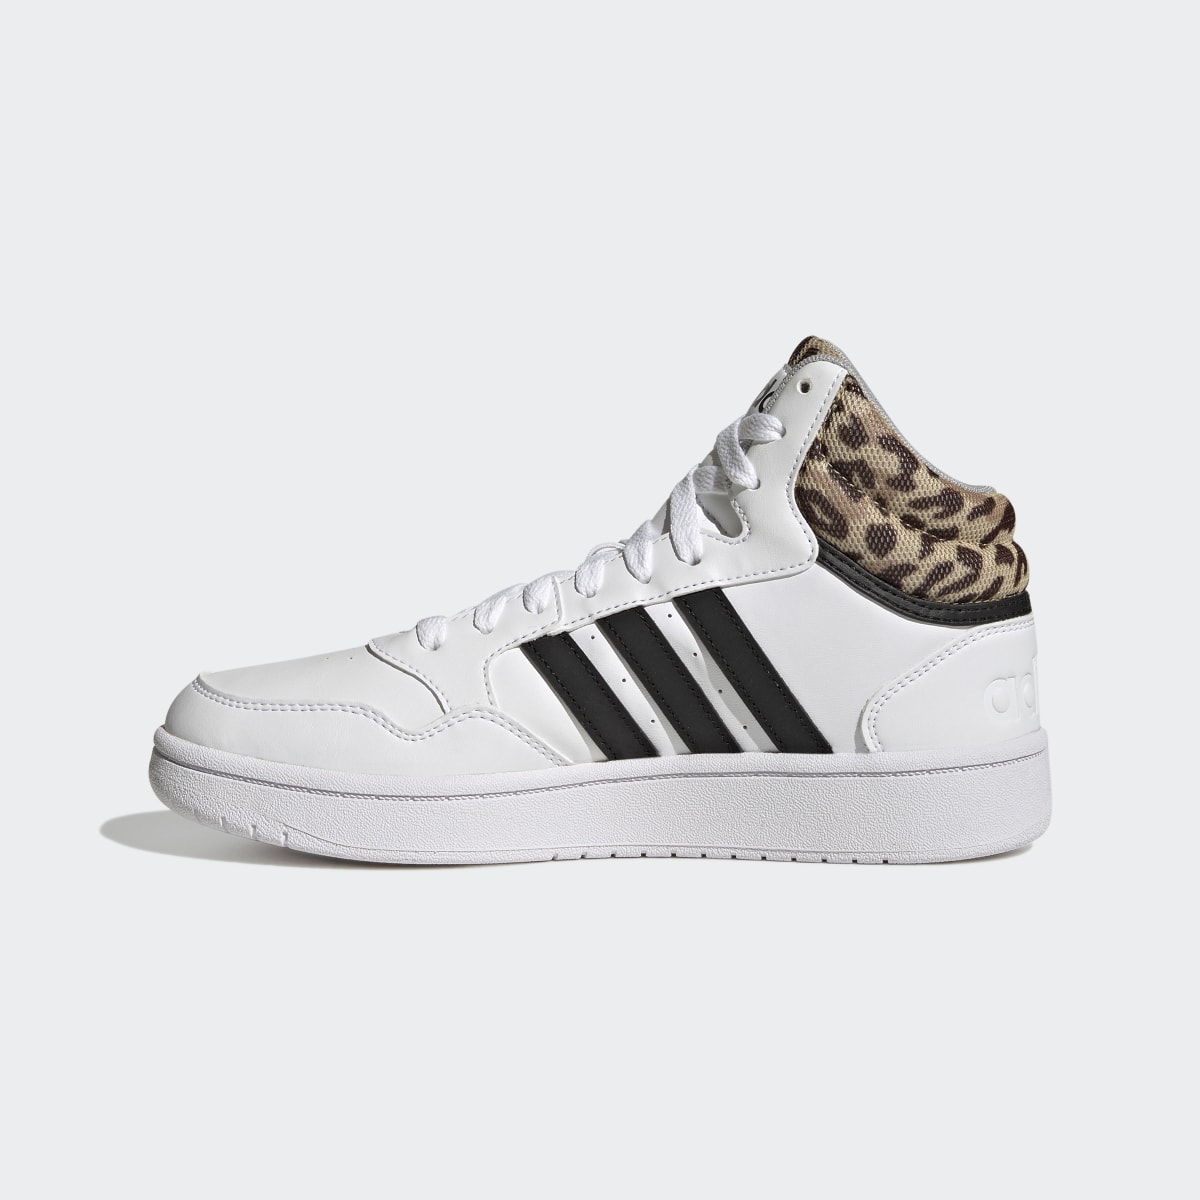 Adidas Hoops 3.0 Lifestyle Basketball Mid Classic Schuh. 7